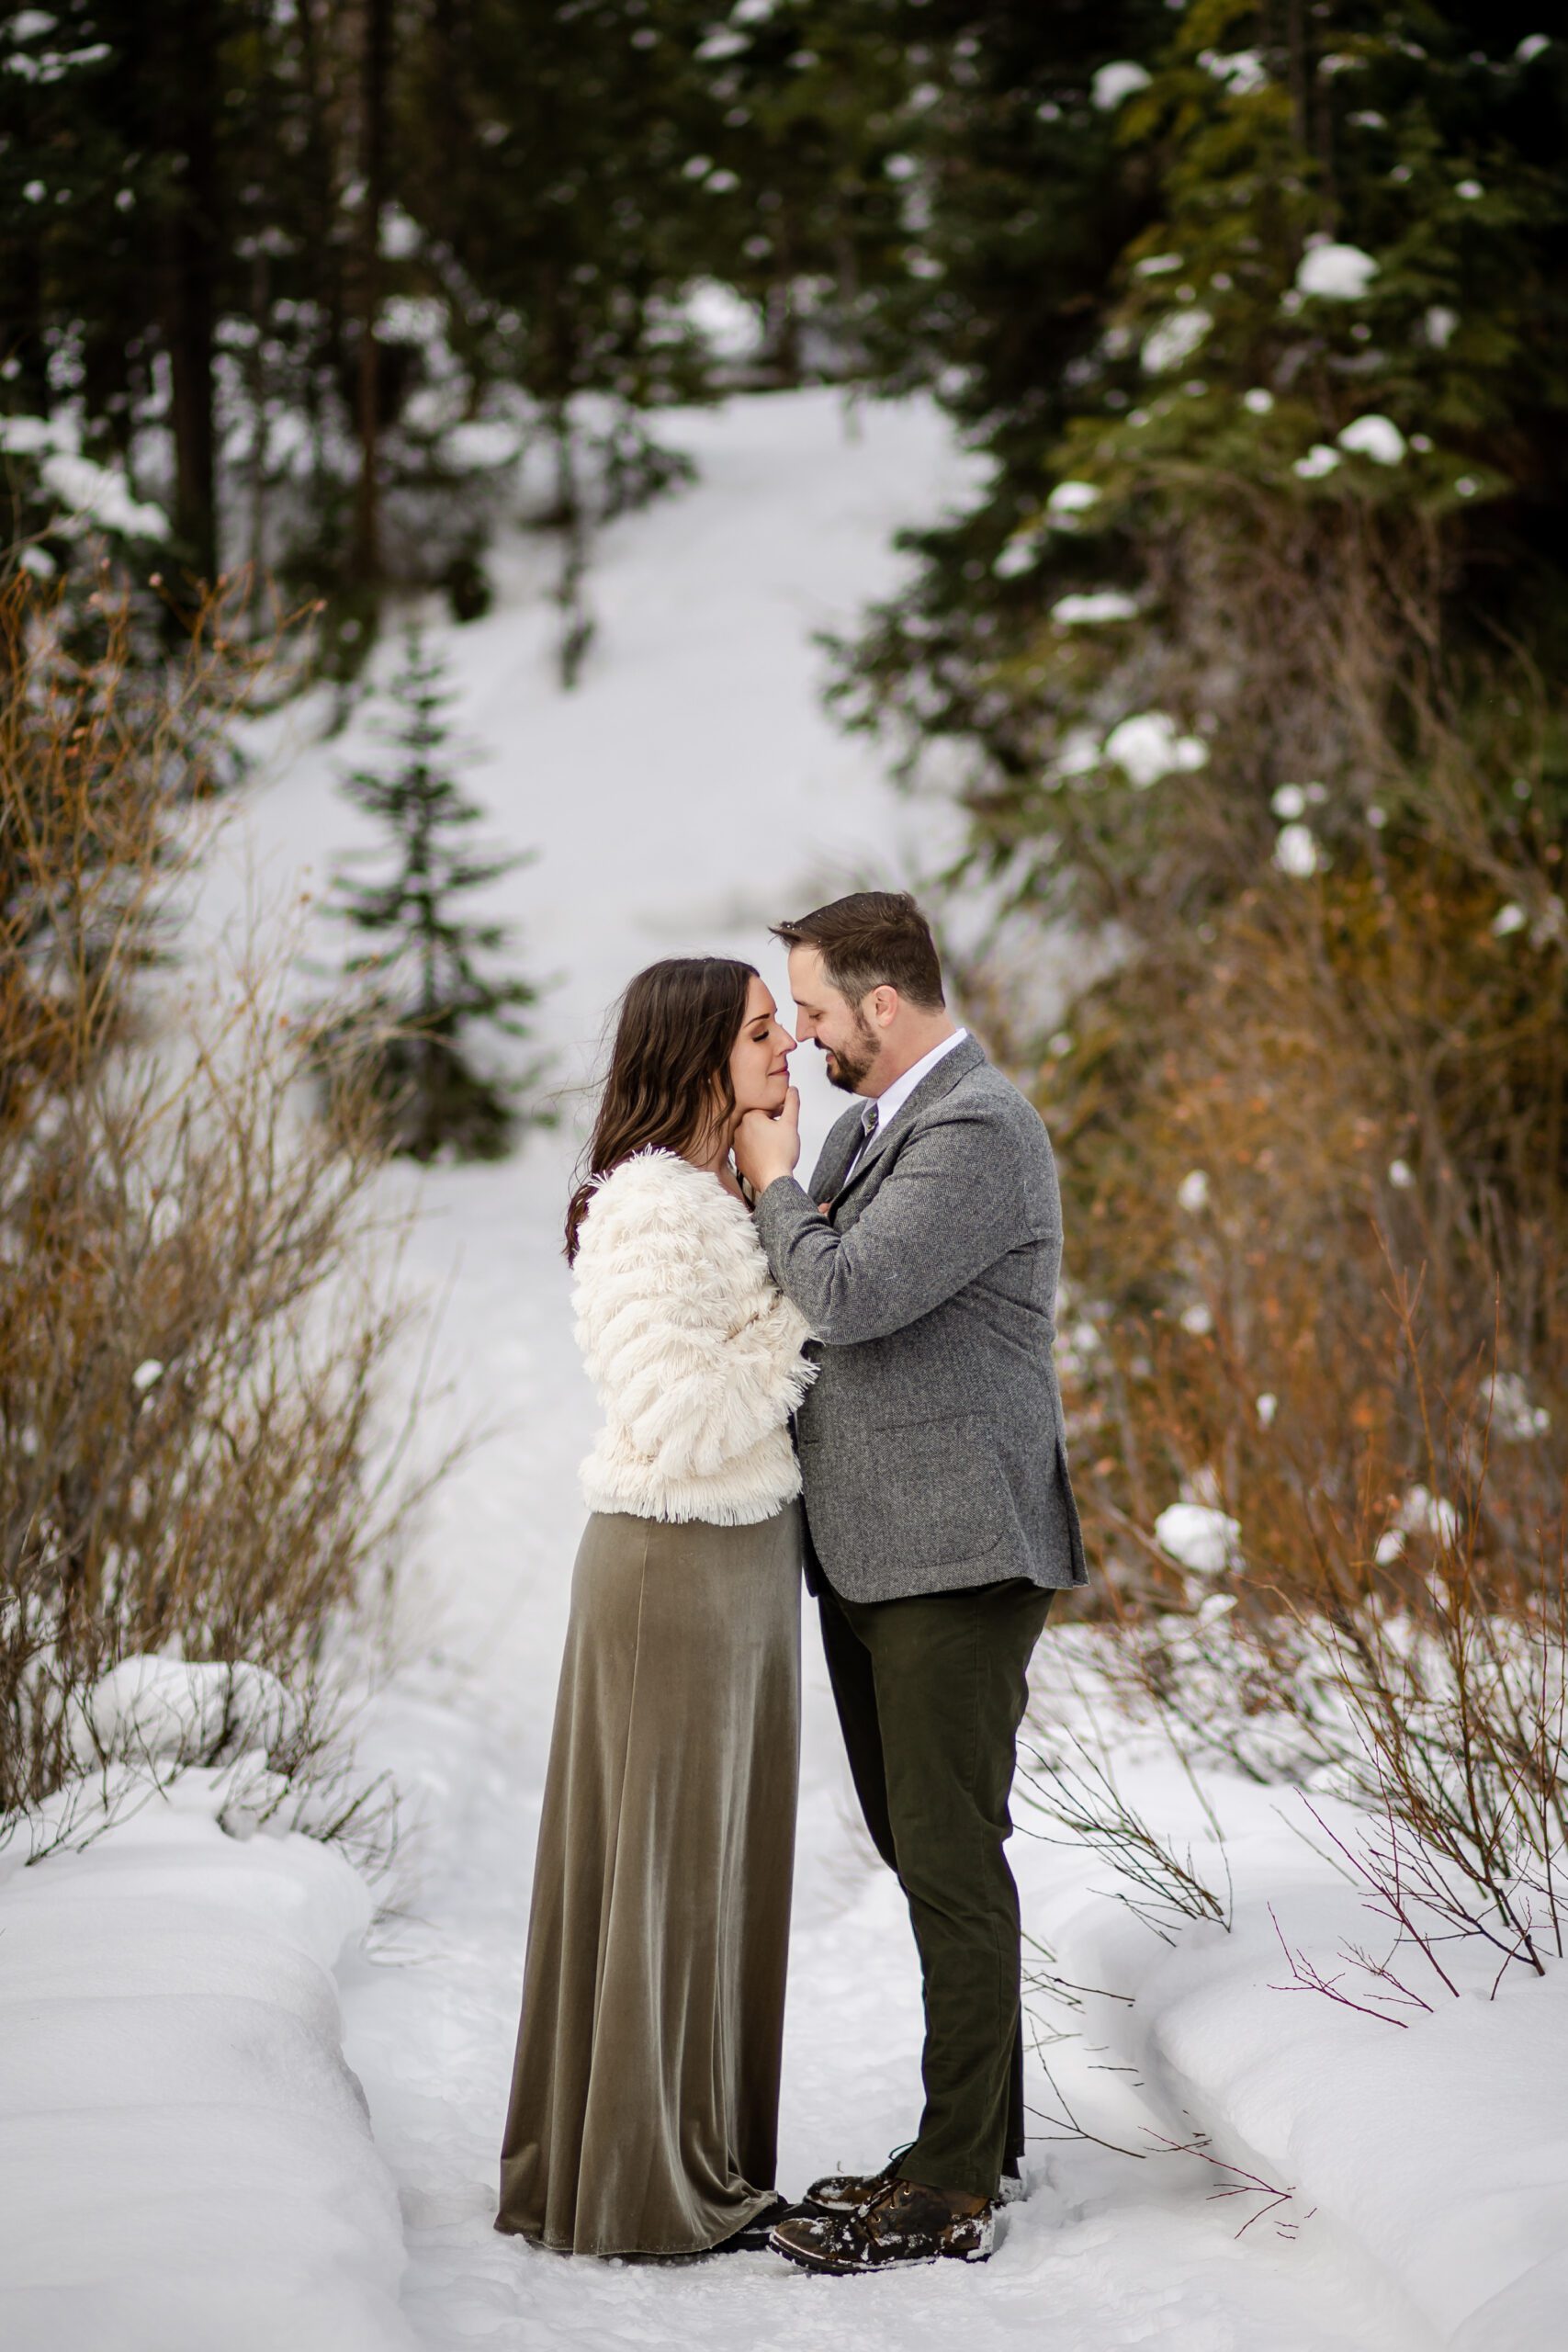 the groom holds his bride's face, both smiling during their Winter Park elopement.